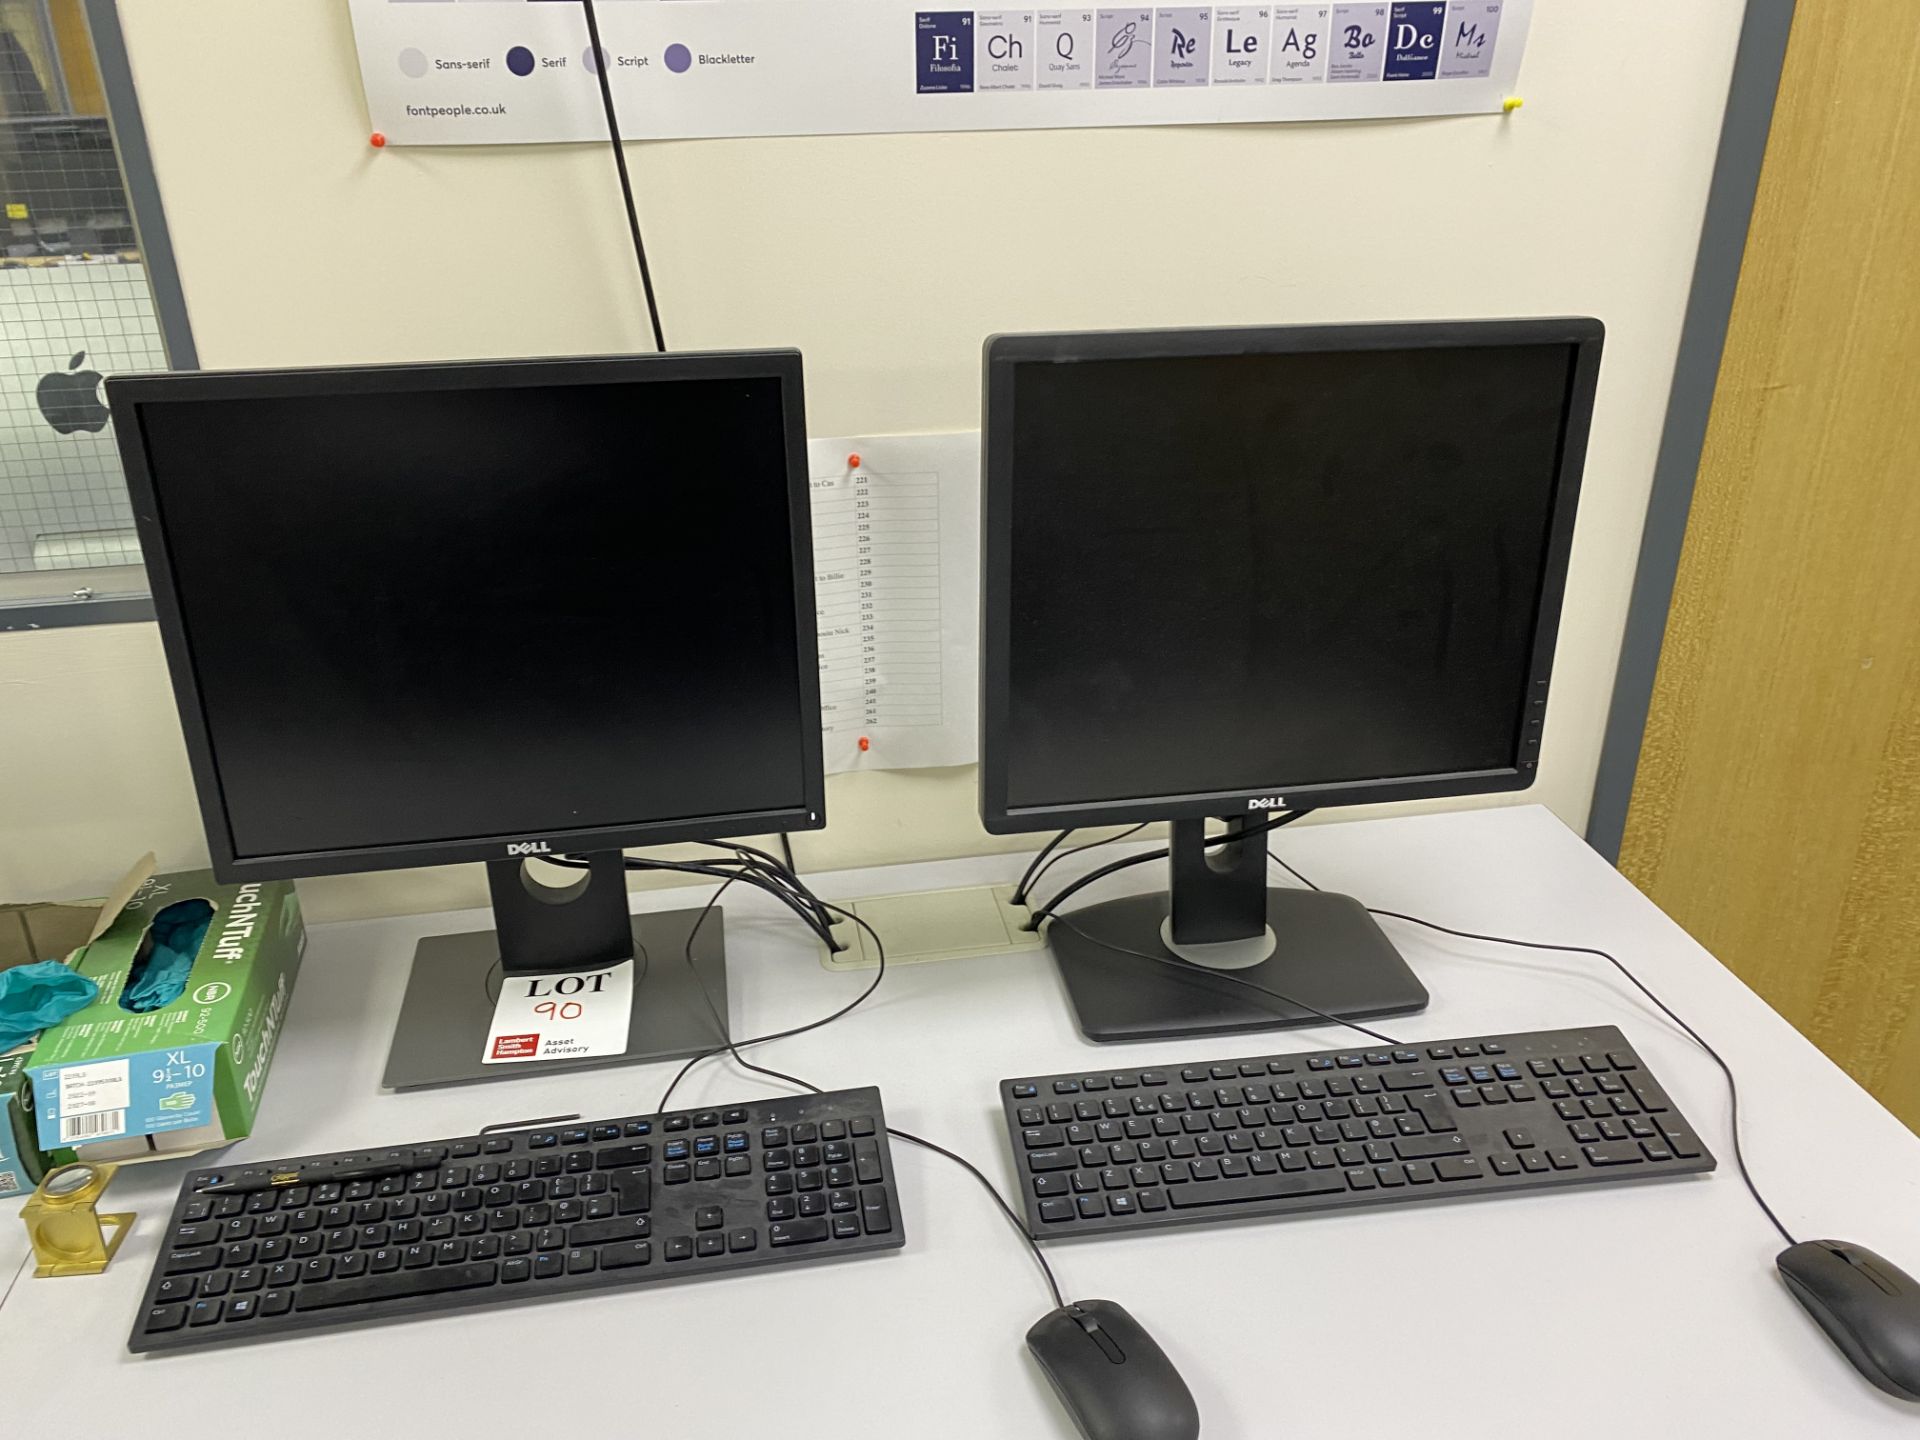 Two Dell LCD monitors